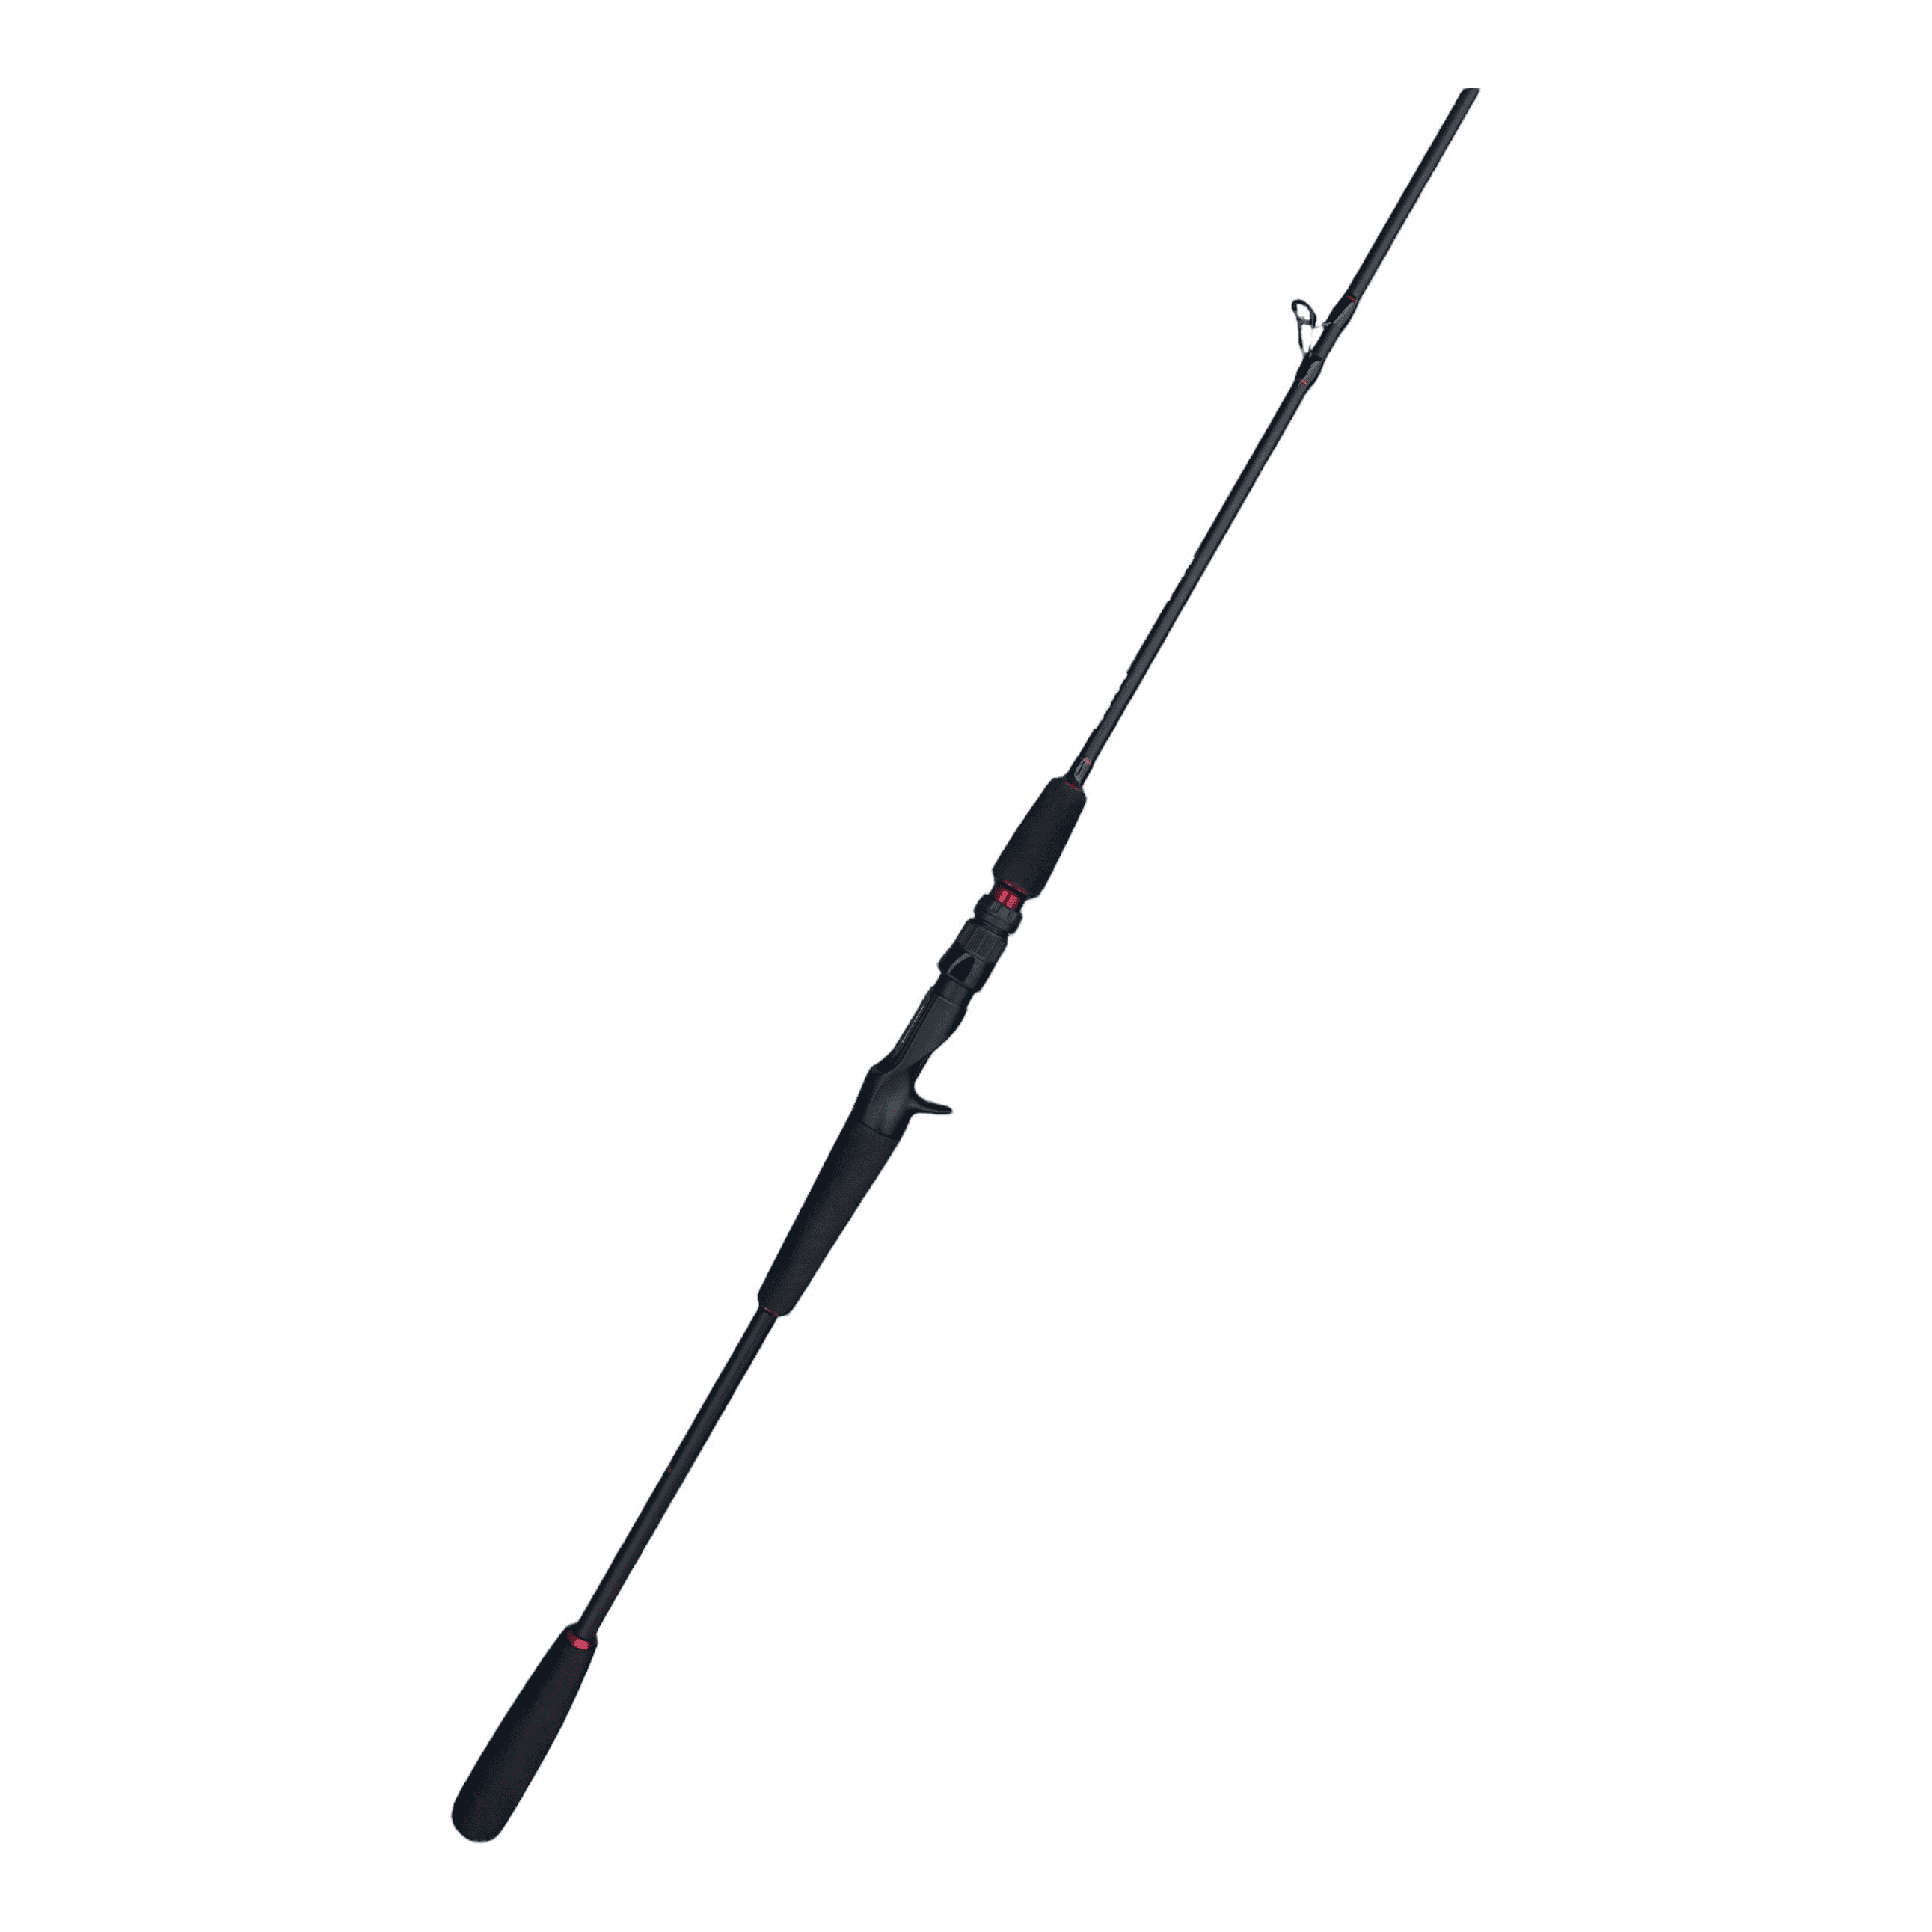 WCFT Pacific Jigging Series Light Action Jigging Rod - Casting